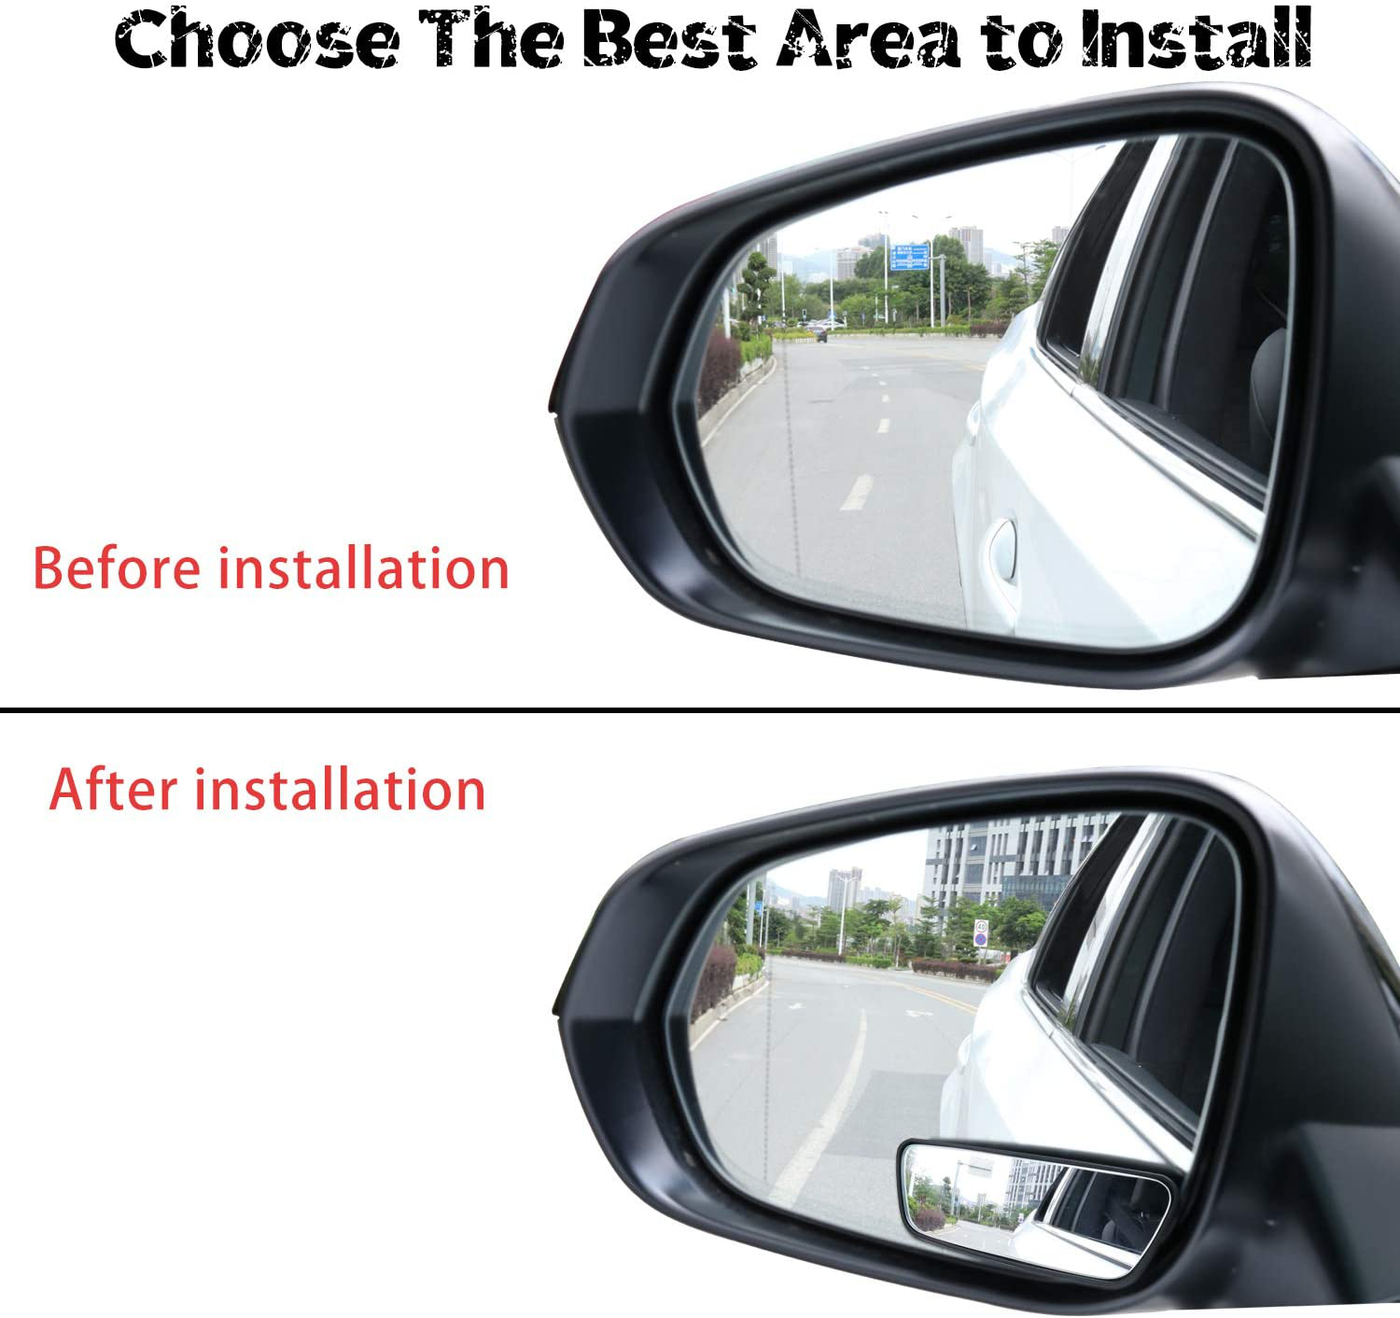 Framed Rectangular Blind Spot Mirror, HD Glass and ABS Housing Convex Wide Angle Rearview Mirror with Adjustable Stick for Universal Car